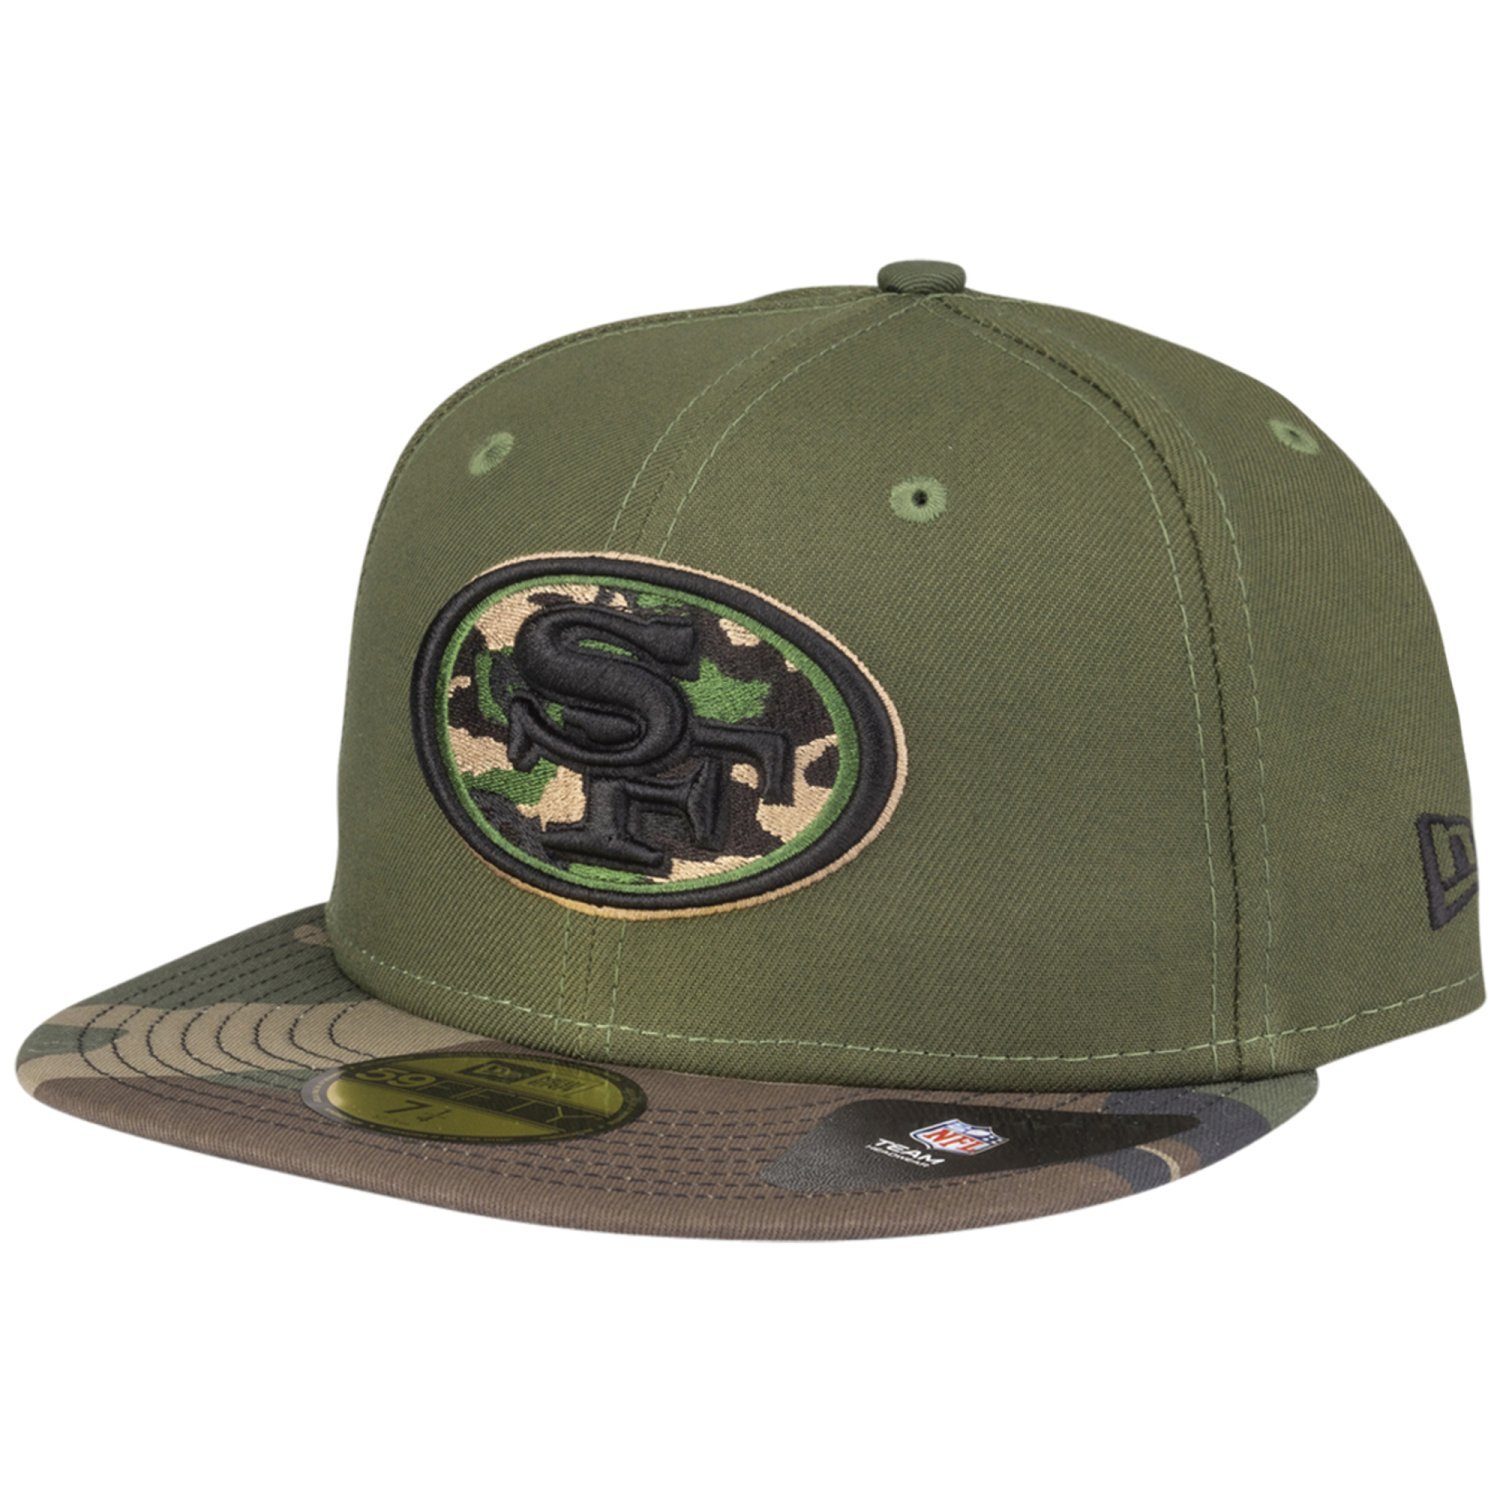 New Era Fitted Cap 59Fifty San Francisco 49ers